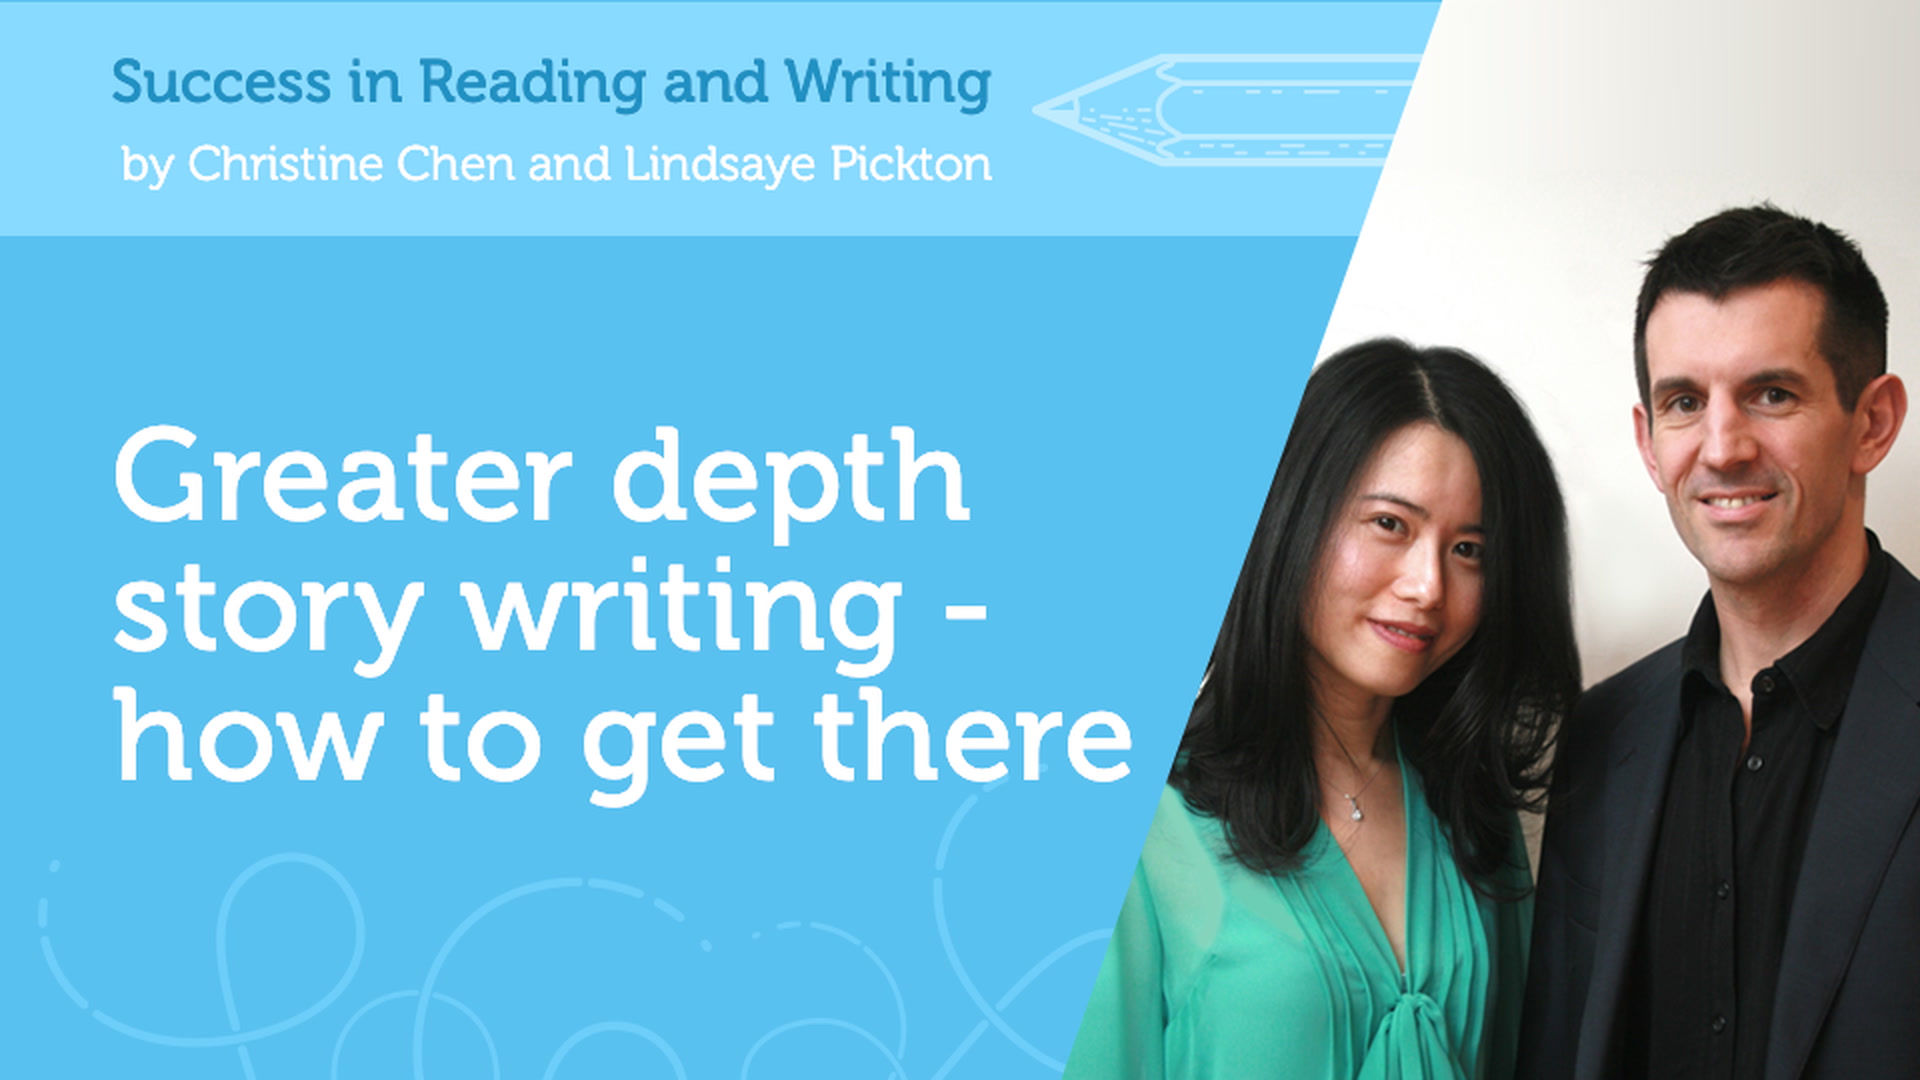 Greater depth story writing - how to get there